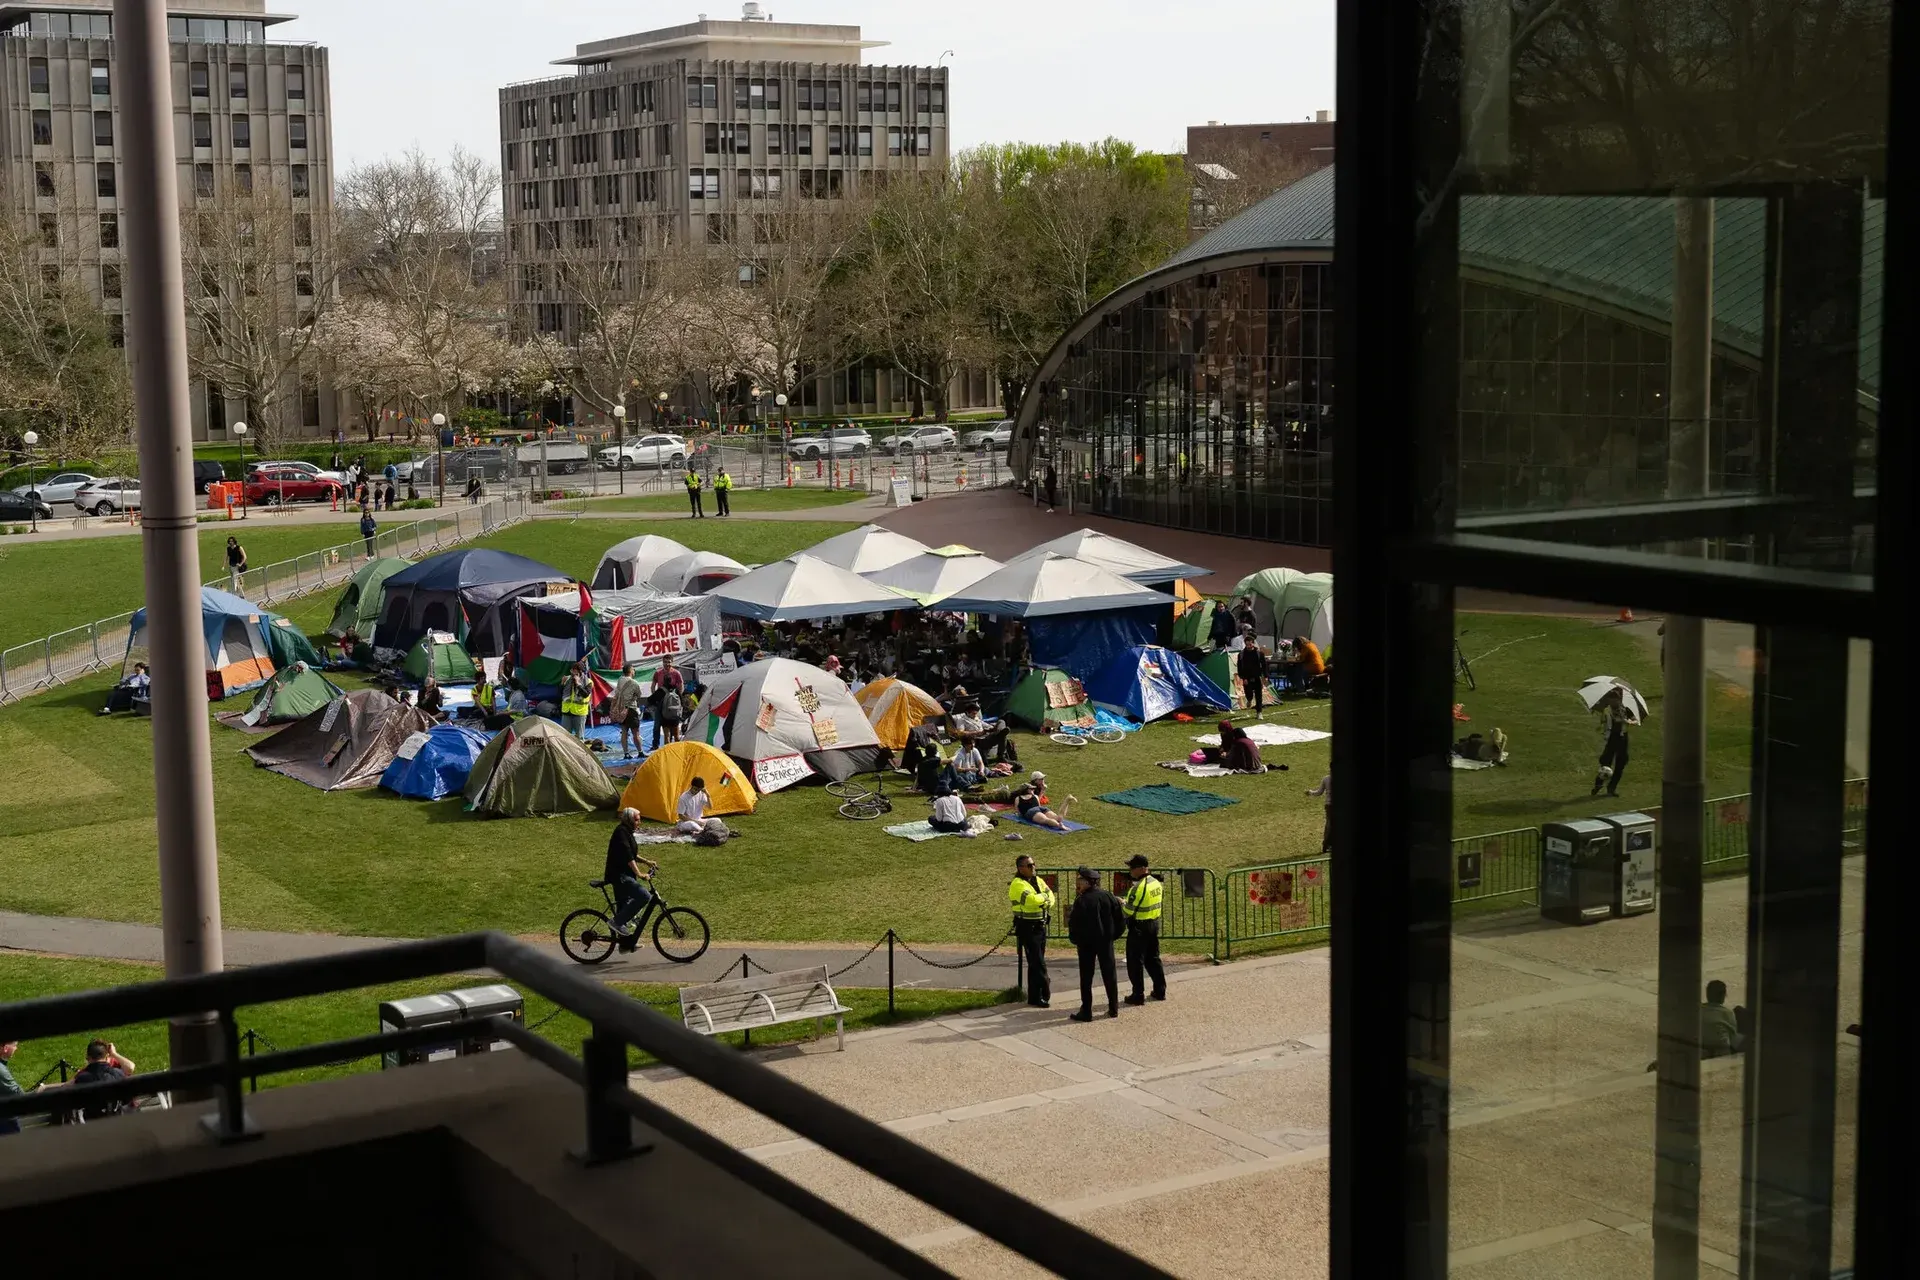 Encampment on a patch of grass in the middle of buildings, like a university campus.